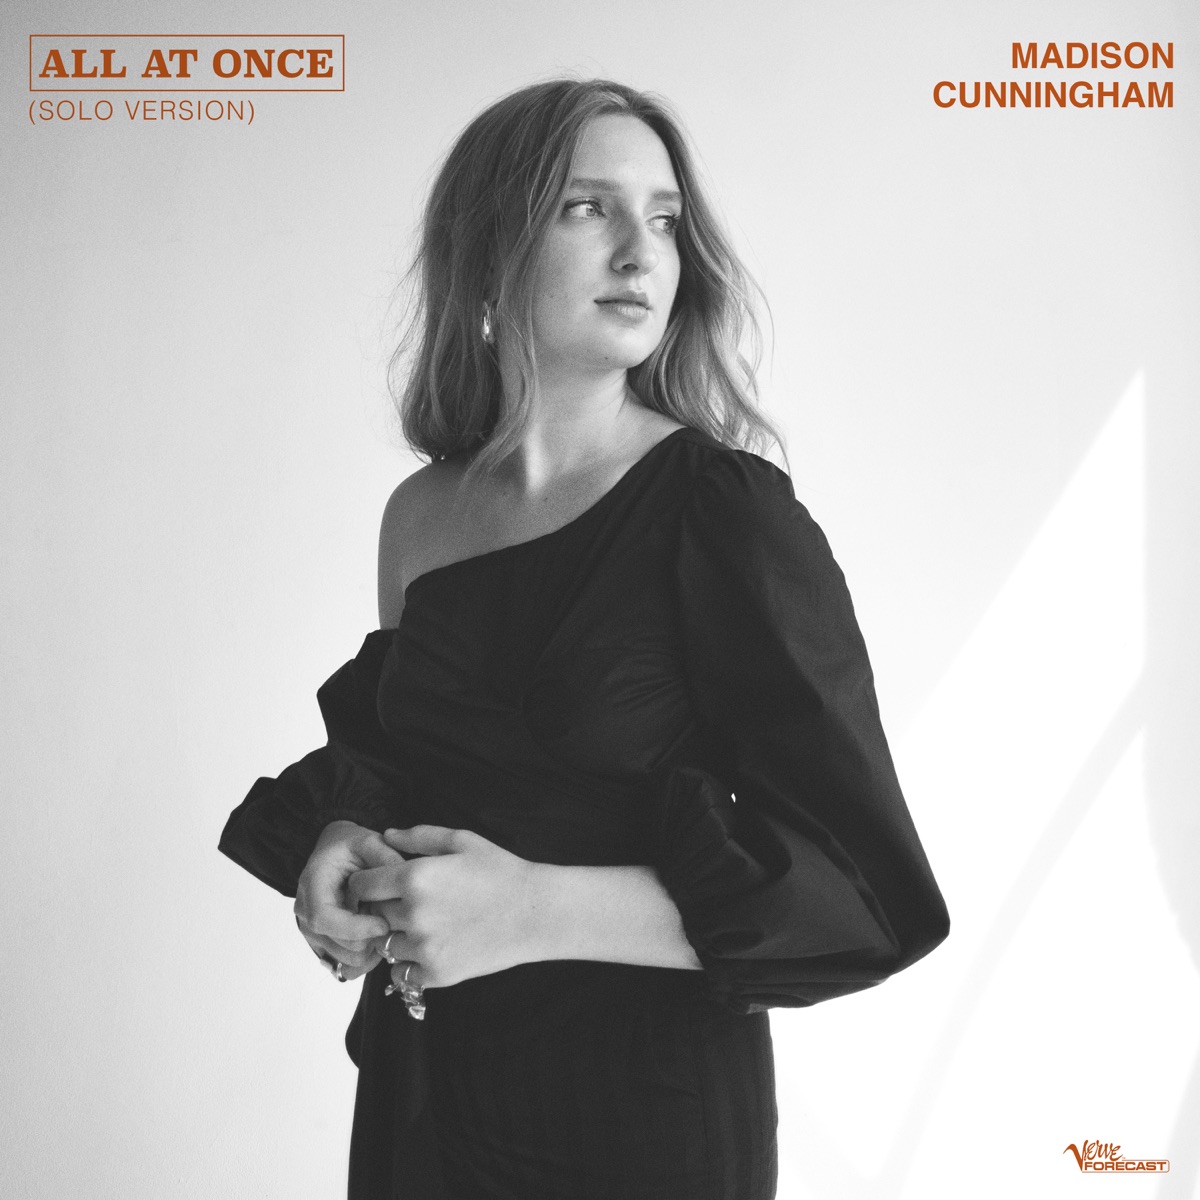 Who Are You Now - Album by Madison Cunningham - Apple Music